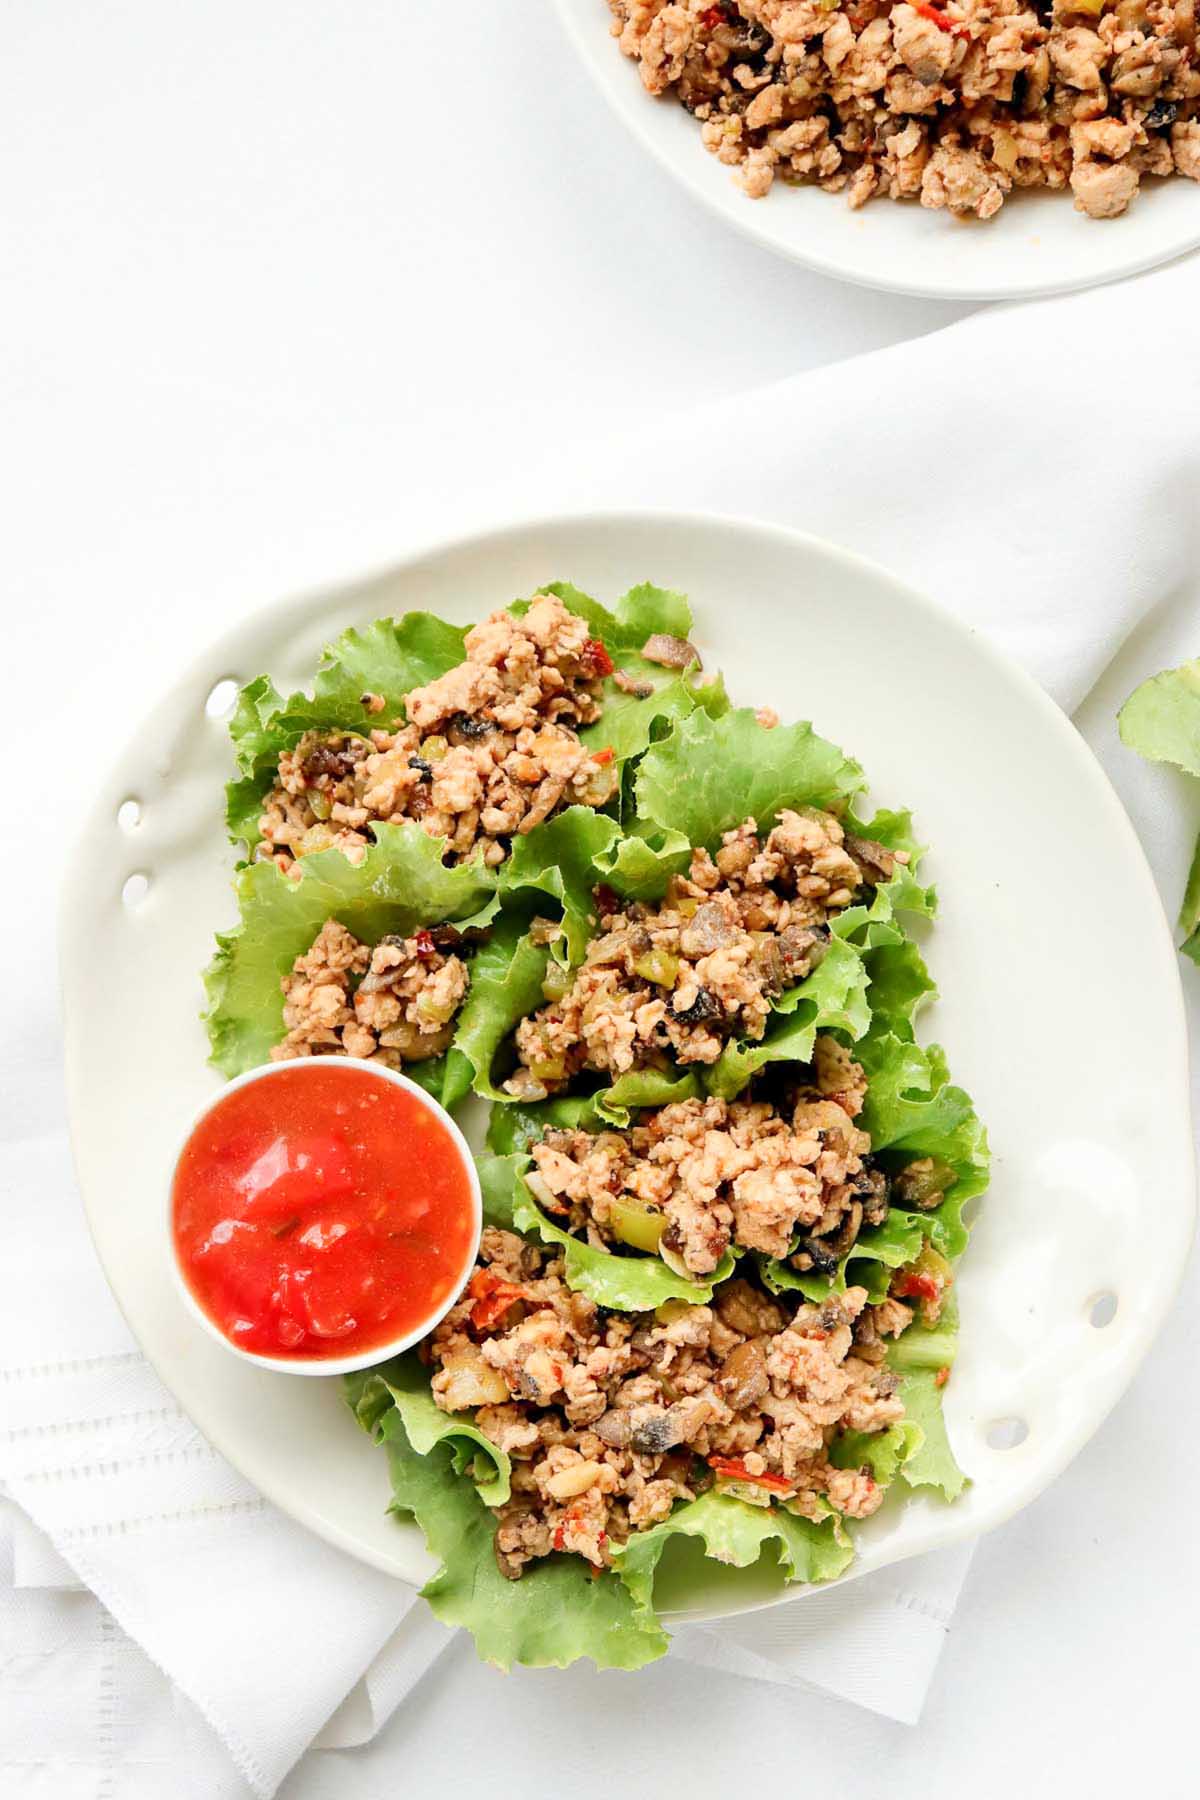 Lettuce wraps on a white plate with sauce.